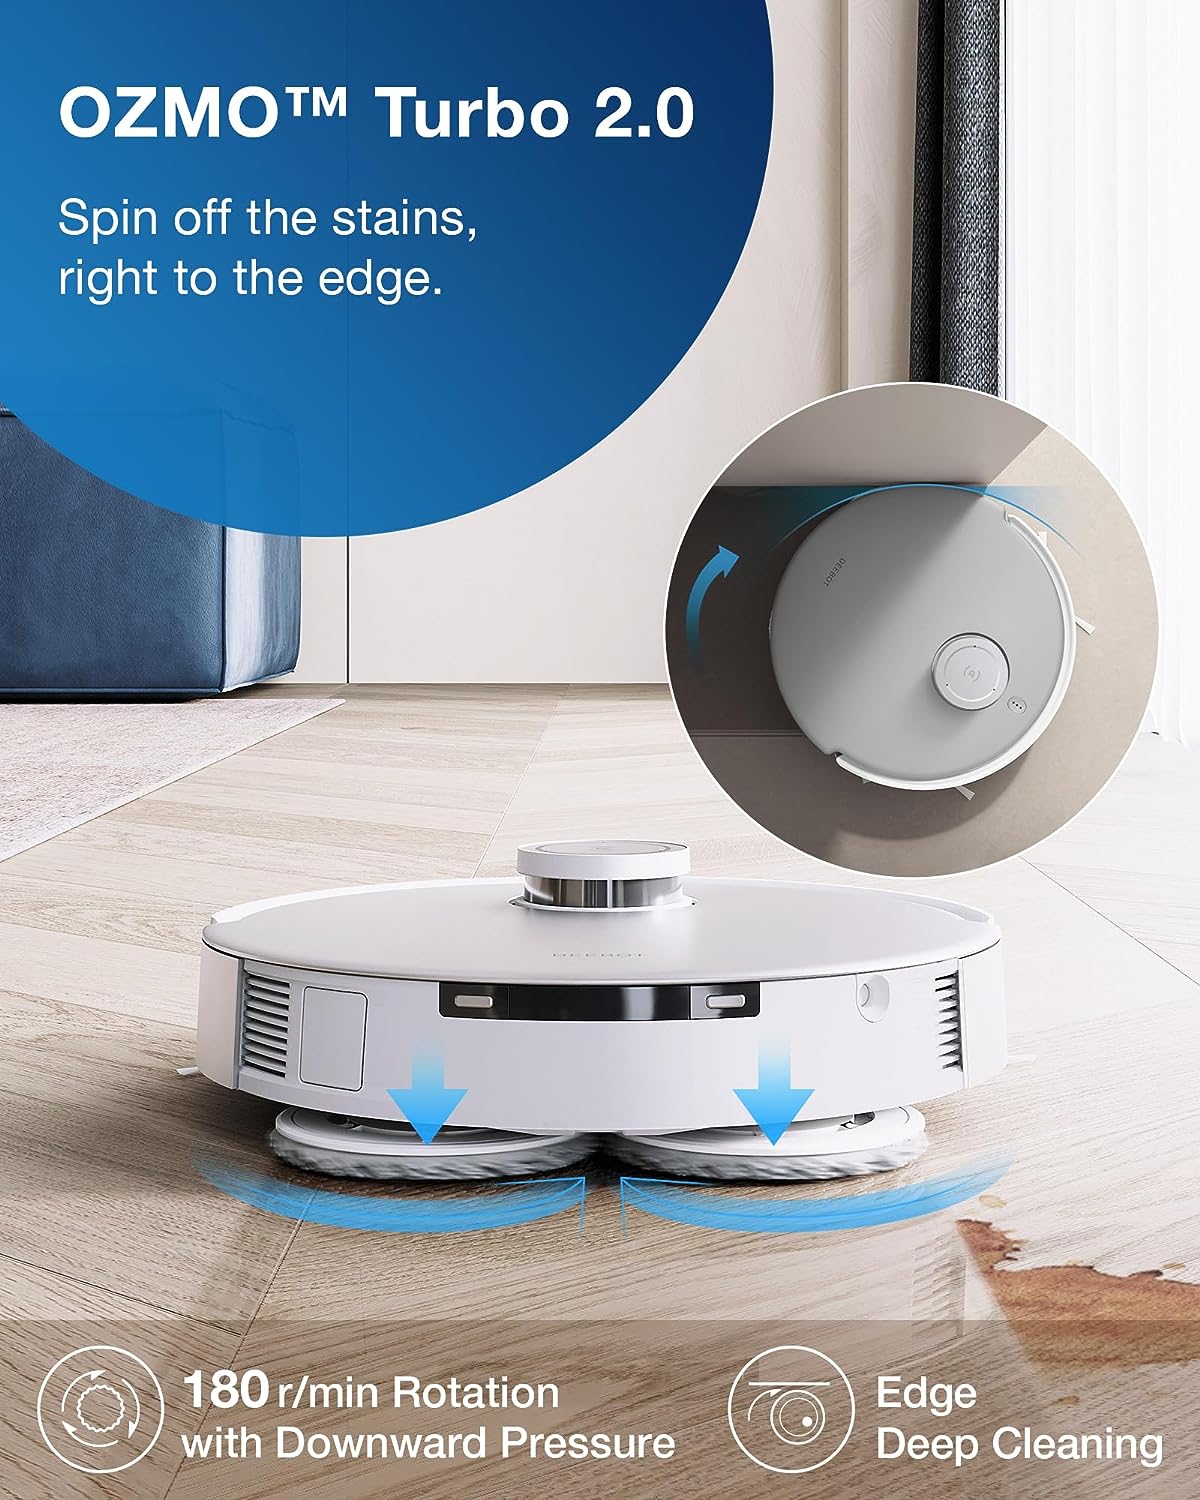 ECOVACS DEEBOT T20 Omni Robot Vacuum and Mop, Hot Water Mop Washing, Self-Emptying, Hot Air Drying, 6000Pa Suction, OZMO Turbo Spinning Mop with Auto Mop Lift, Obstacle Avoidance, YIKO Voice Assistant